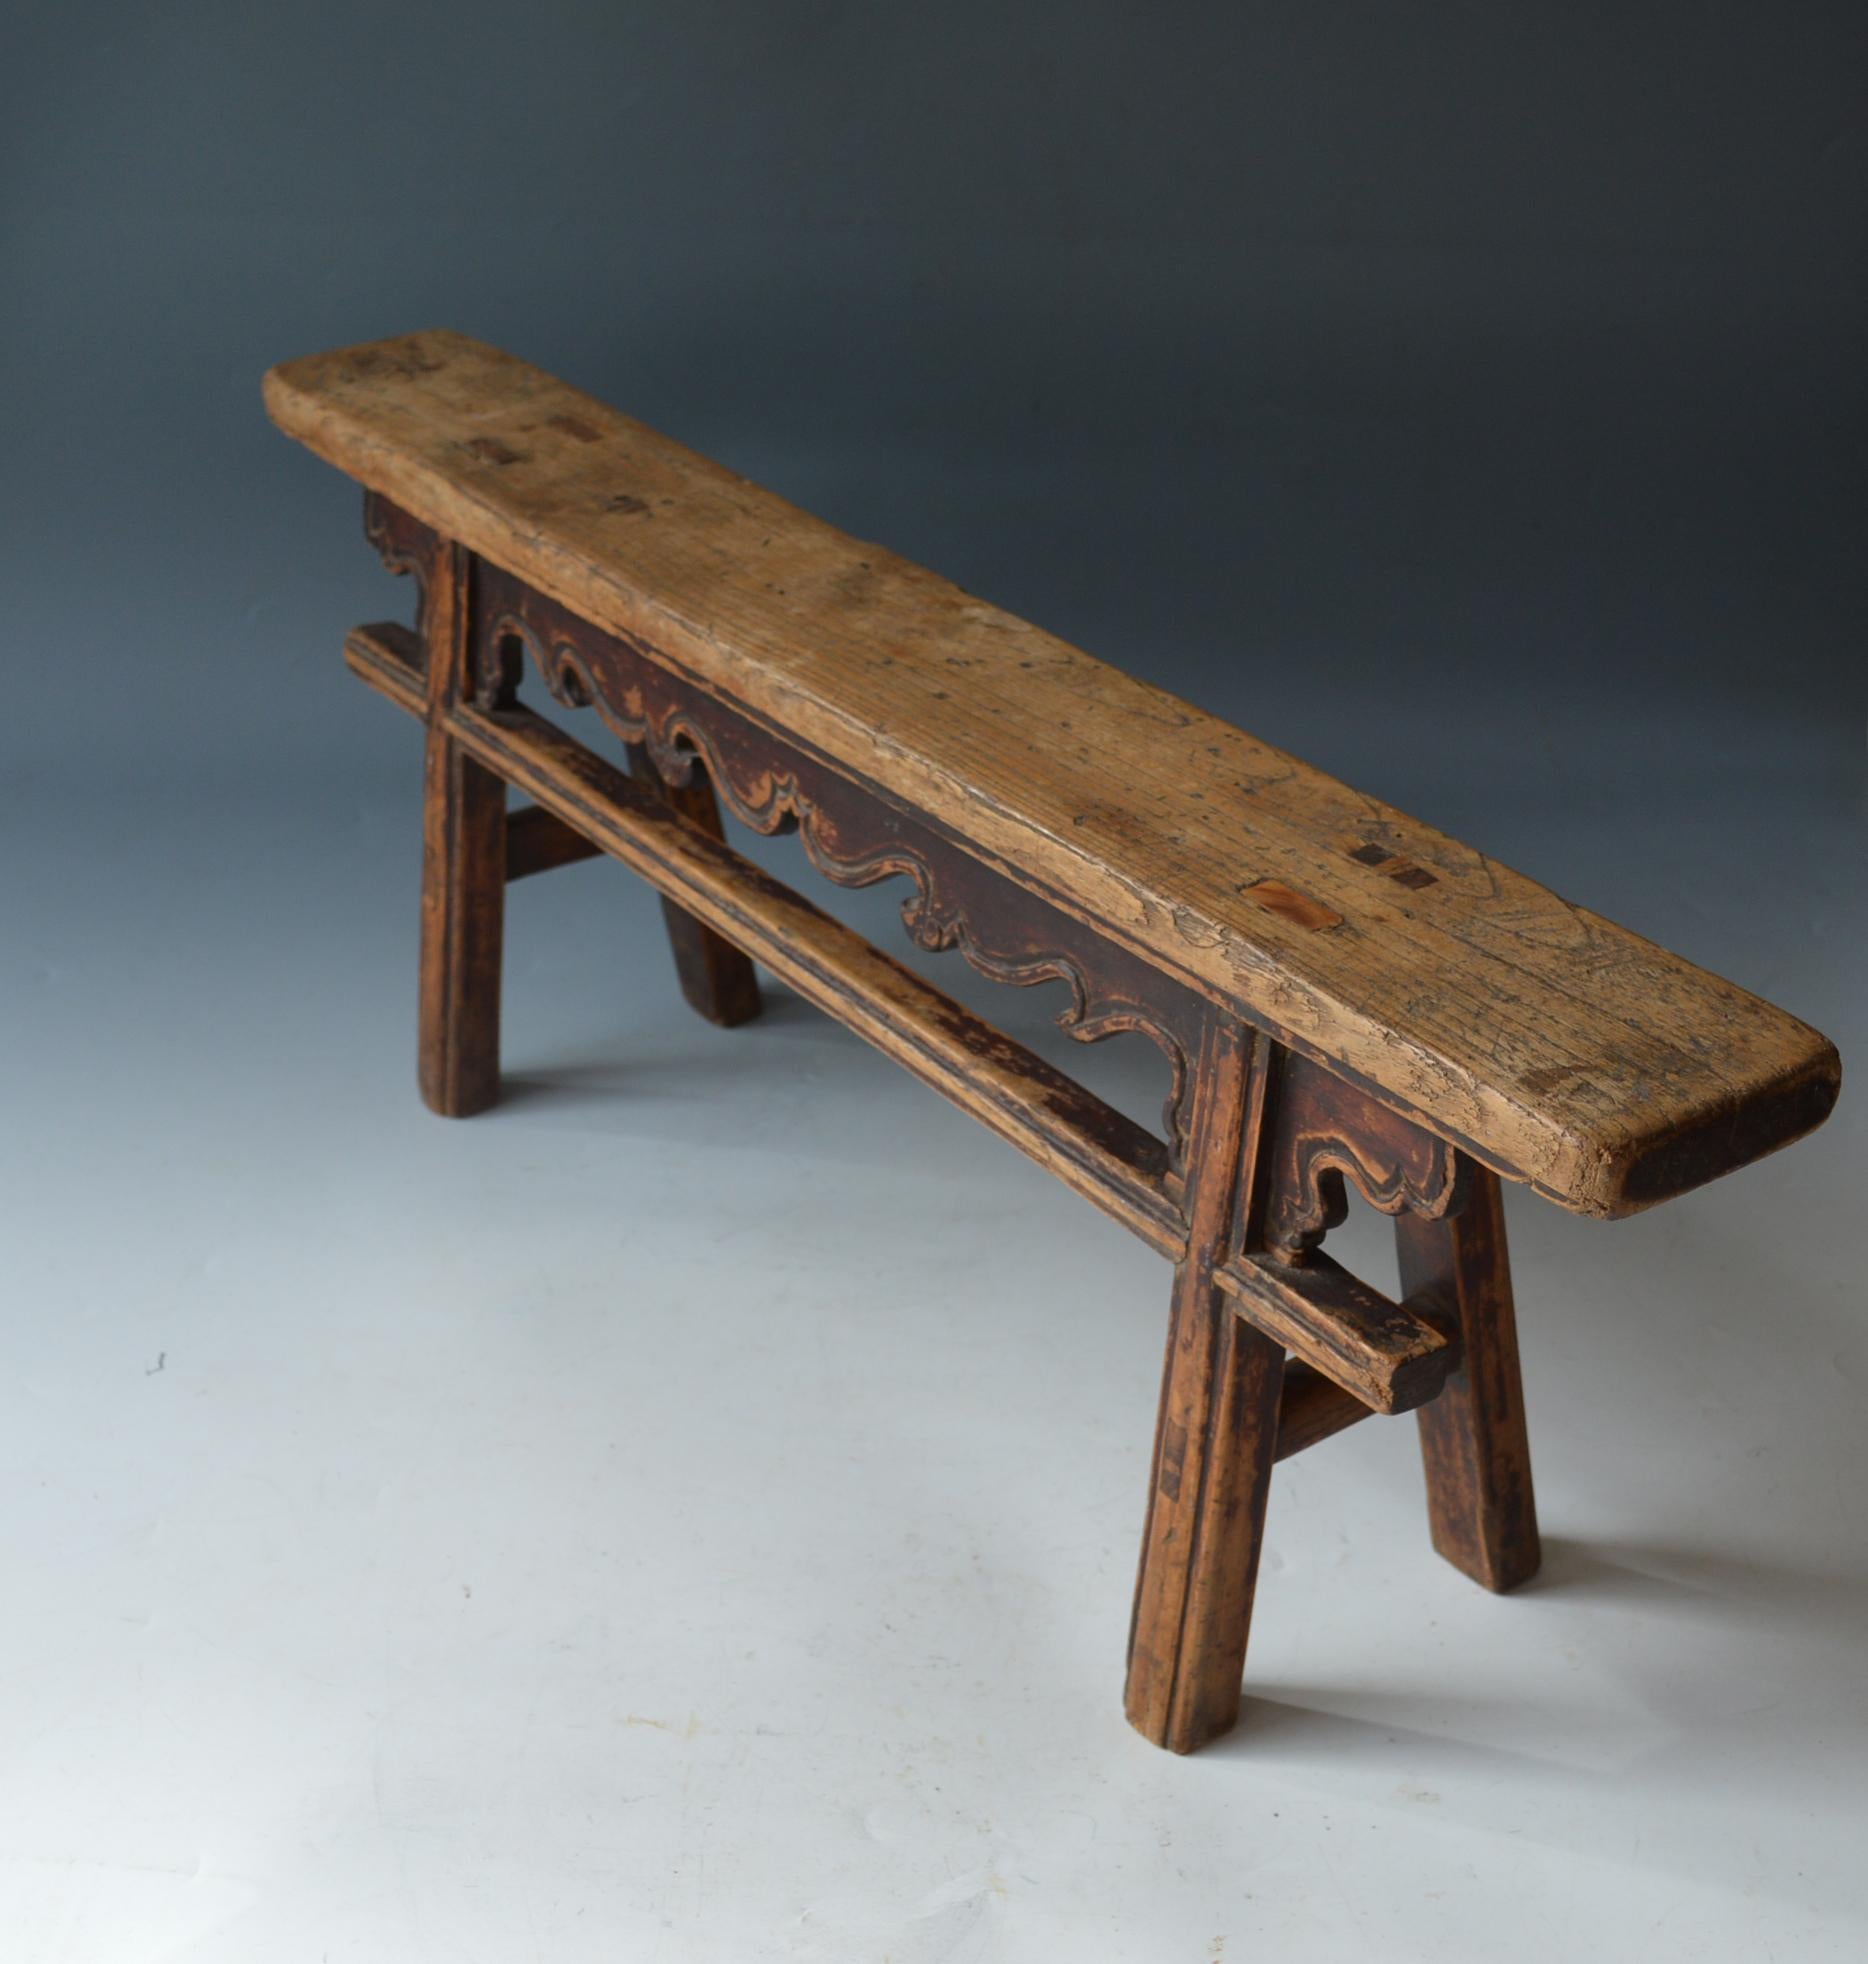 Hand-Crafted Small Antique Chinese Provincial Altar Table, 18th, 19th Century